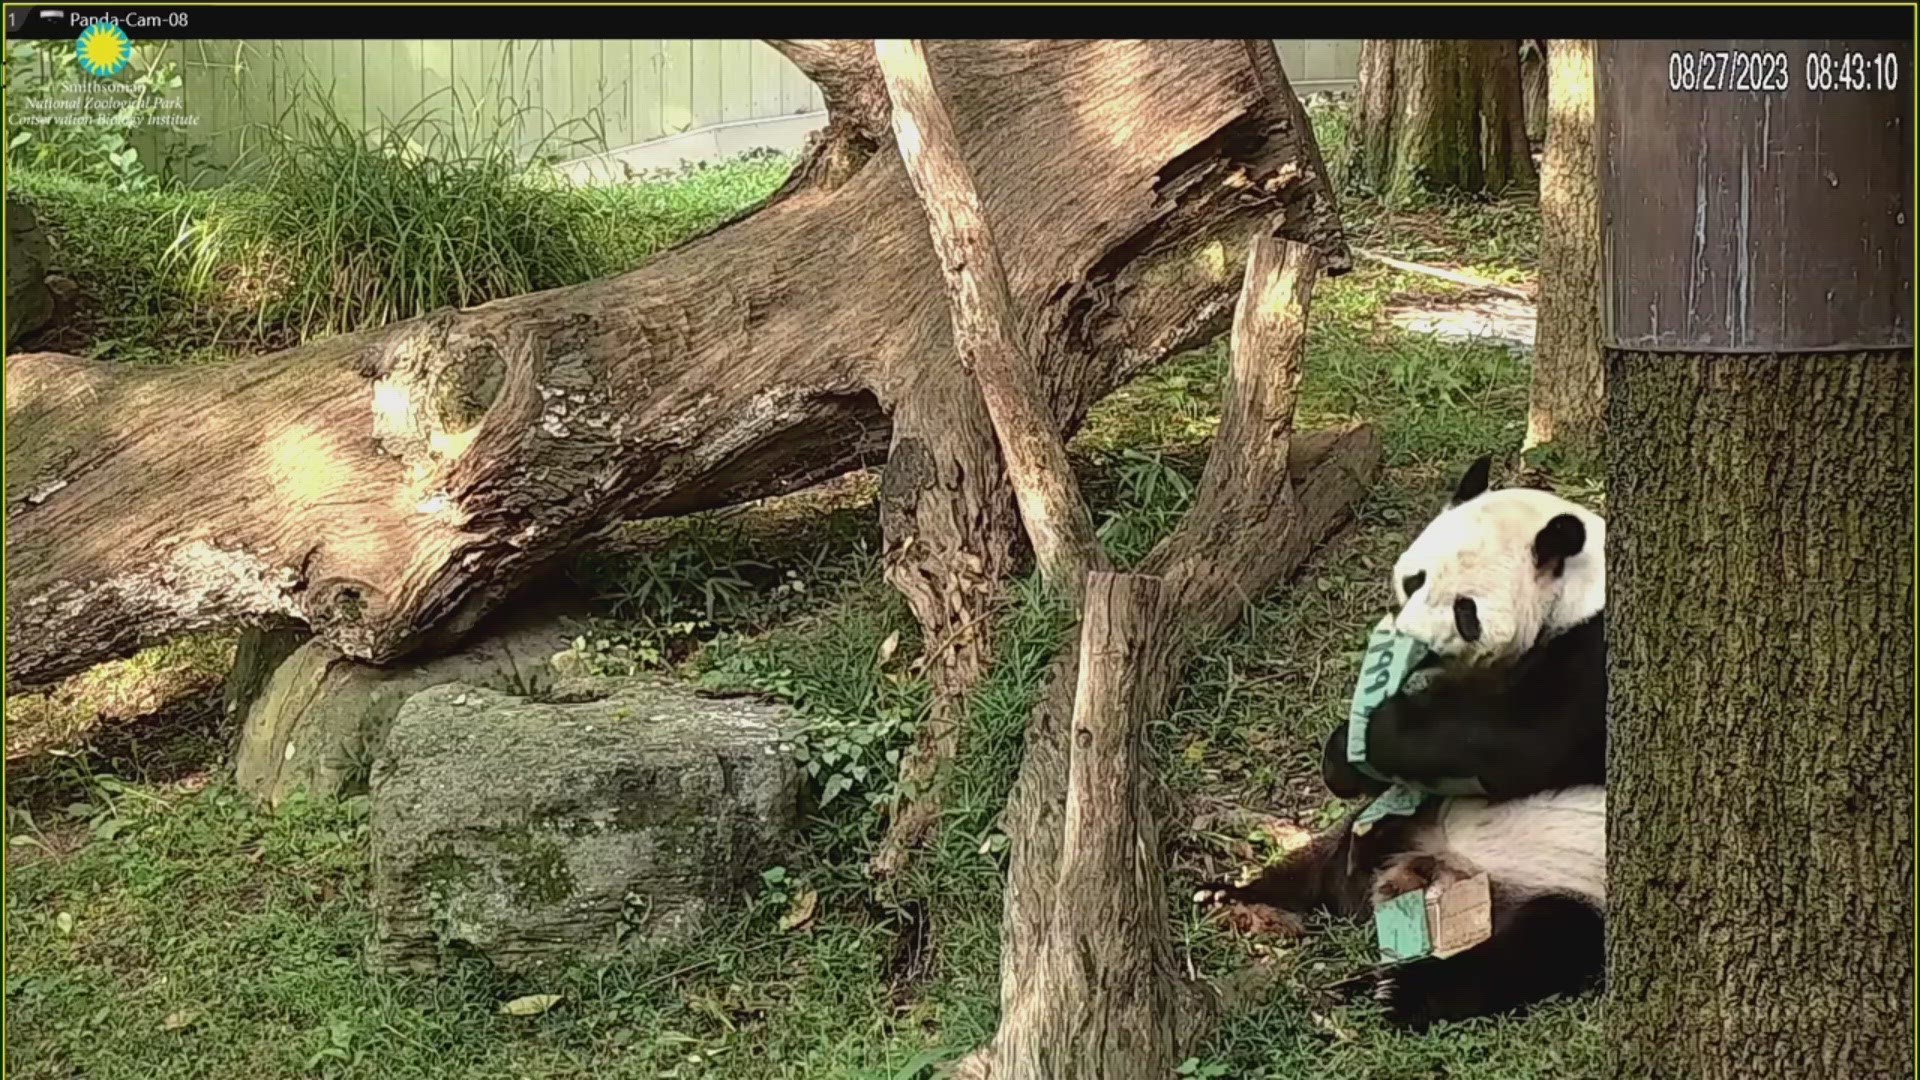 Tian Tian is turning 26, celebrating his final birthday in D.C. before heading home to China in December.